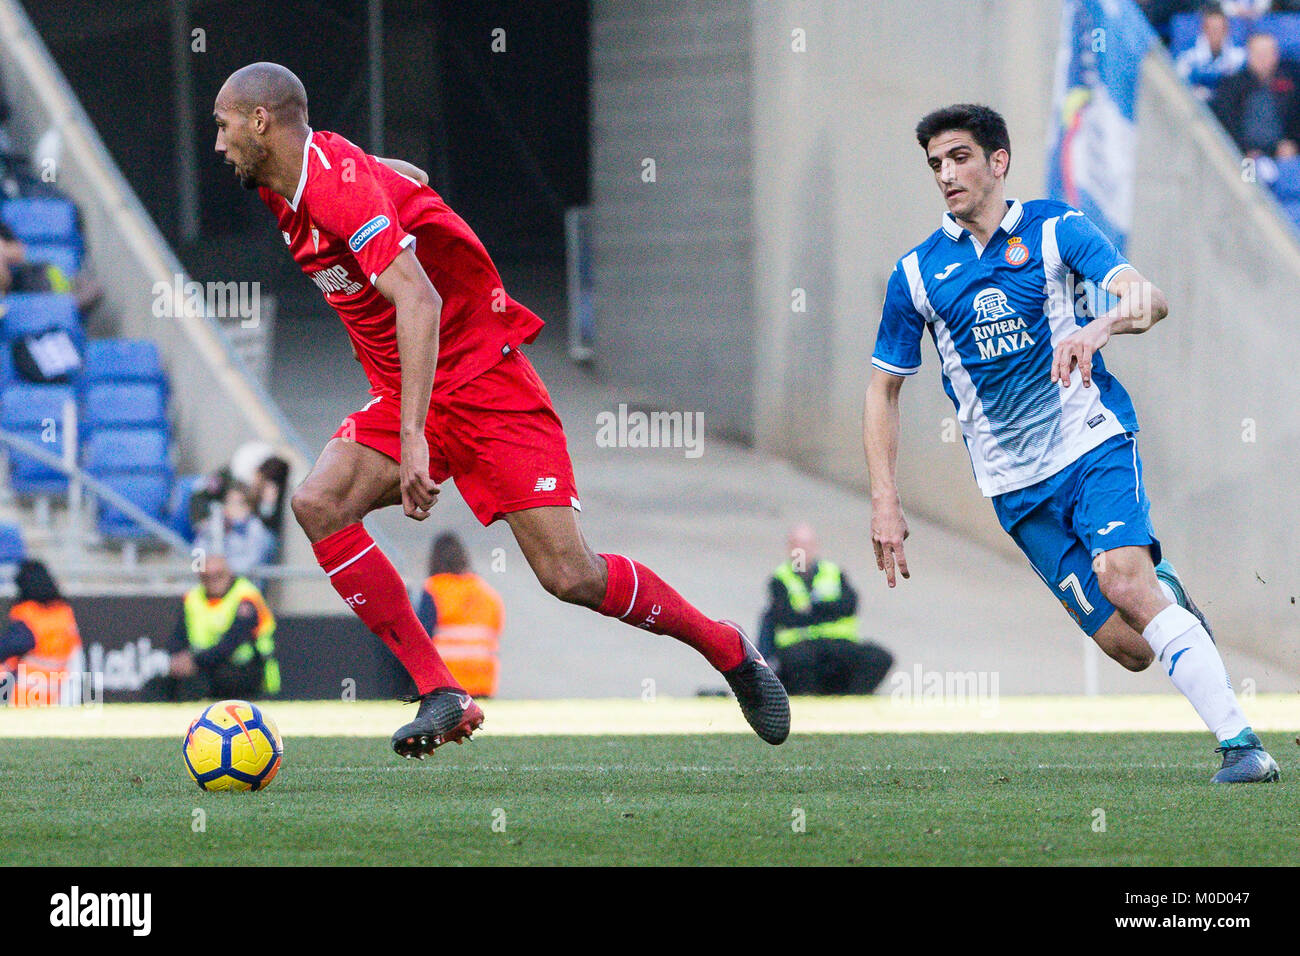 Barcelona, Spain. 20th Jan, 2018. Sevilla CF midfielder Steven N'Zonzi (15) and RCD Espanyol forward Gerard Moreno (7) during the match between RCD Espanyol and Sevilla CF, for the round 20 of the Liga Santander, played at RCDE Stadium on 20th January 2018 in Barcelona, Spain. Credit: Gtres Información más Comuniación on line, S.L./Alamy Live News Stock Photo